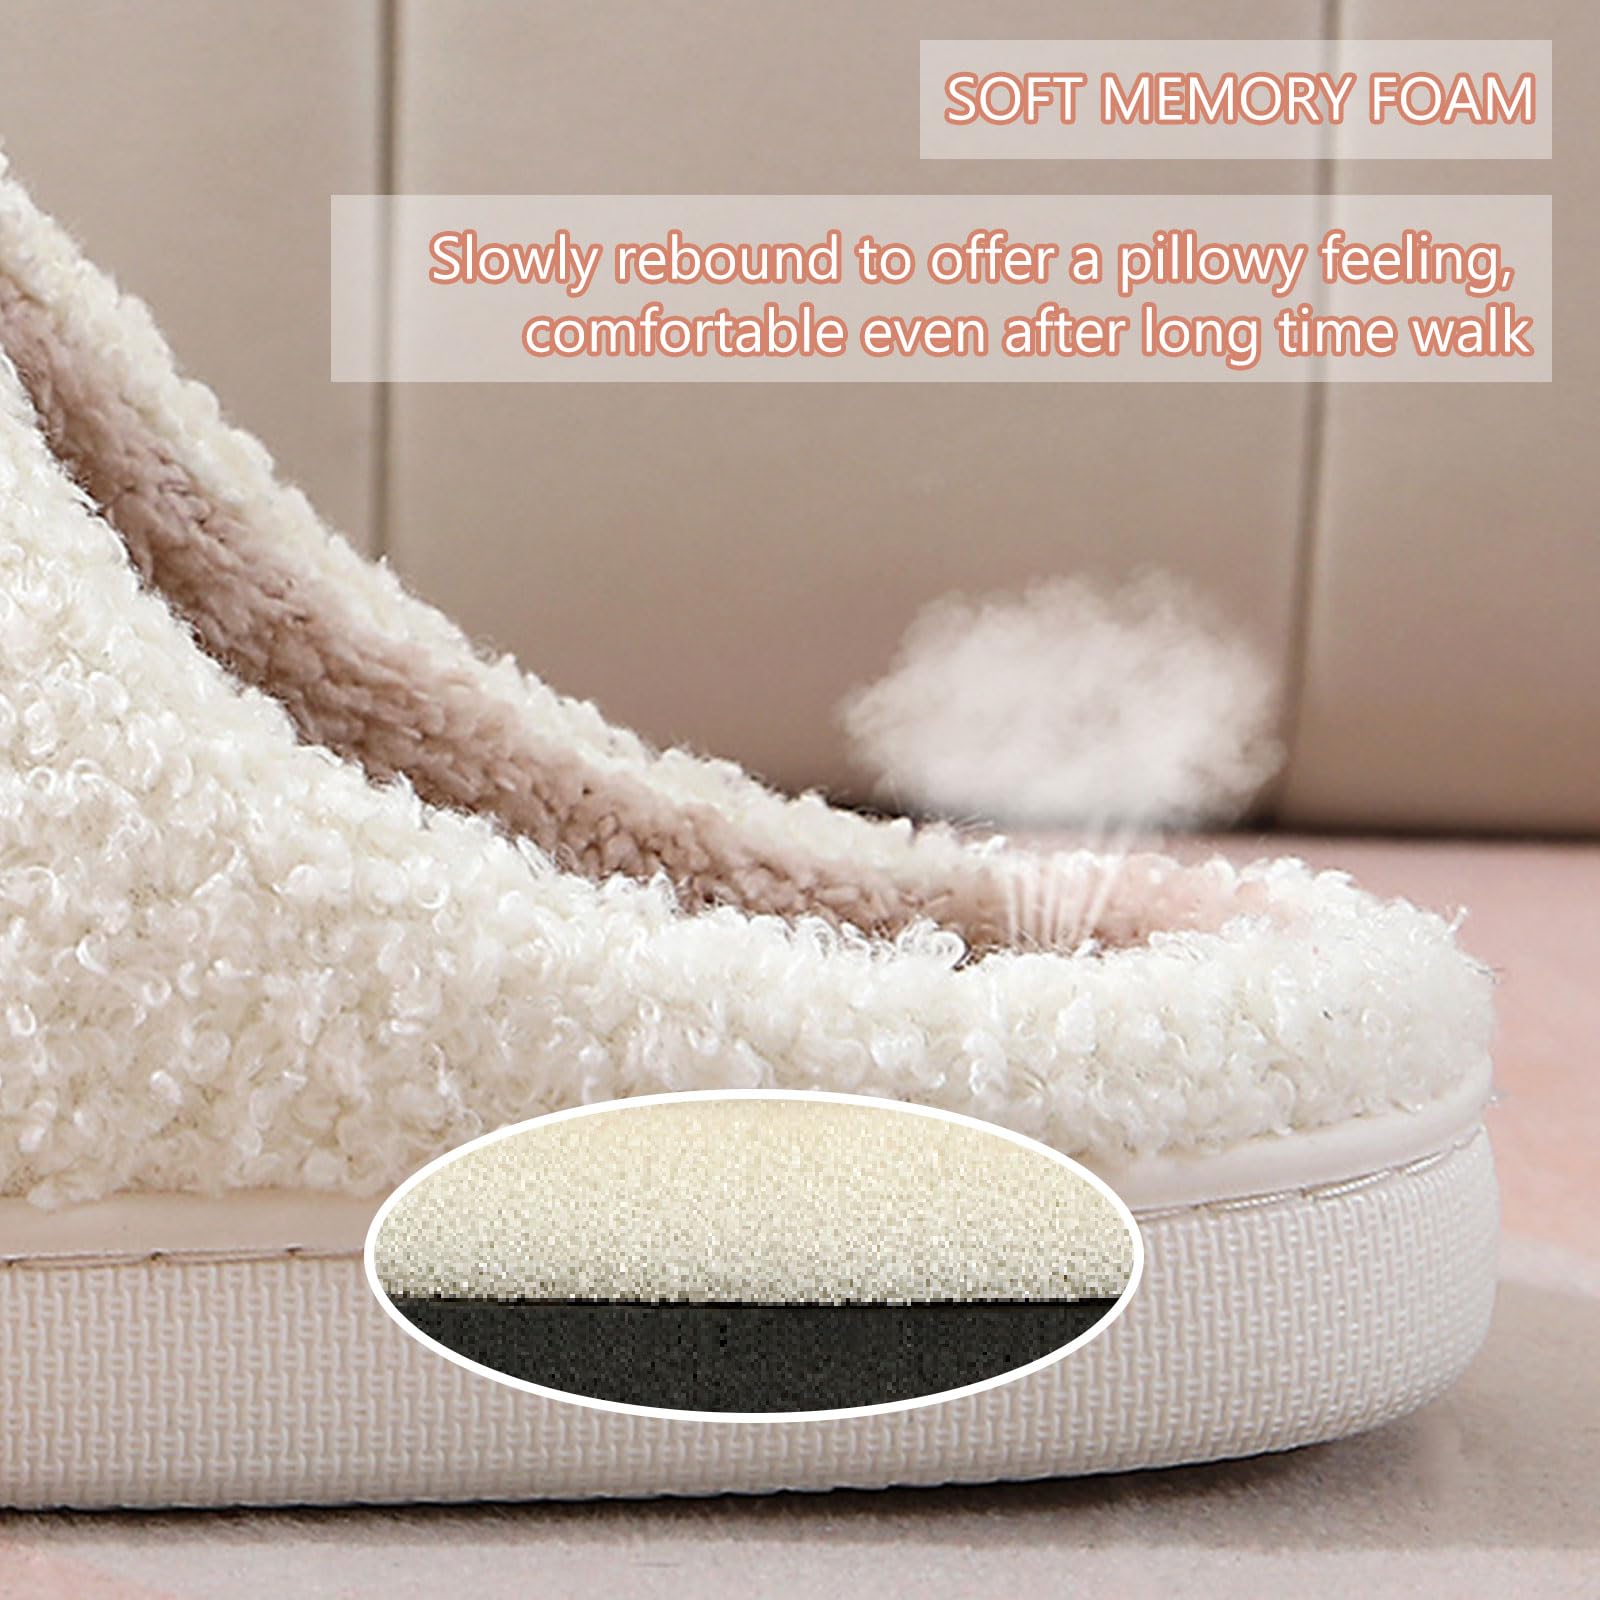 V OPXIN Valentines Slippers for Womens Mens Cute Slippers Cozy Plush Warm Slip-on House Shoes for Indoor and Outdoor Strawberry Mushroom Evil Eyes Love Heart Slippers Valentine's Day Gifts